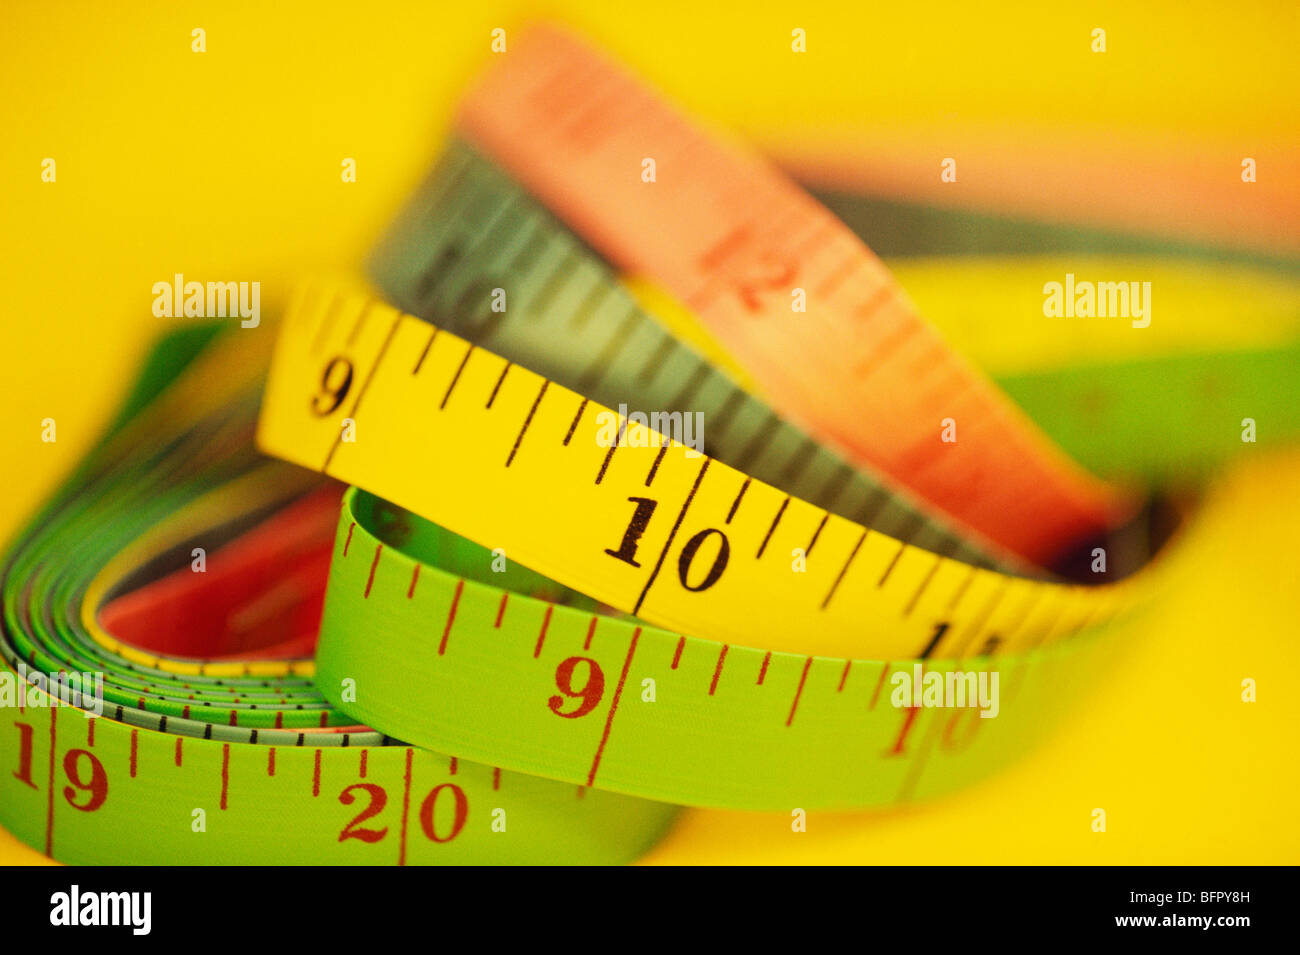 VHM 66710 : Tailor measuring tape on yellow background Stock Photo